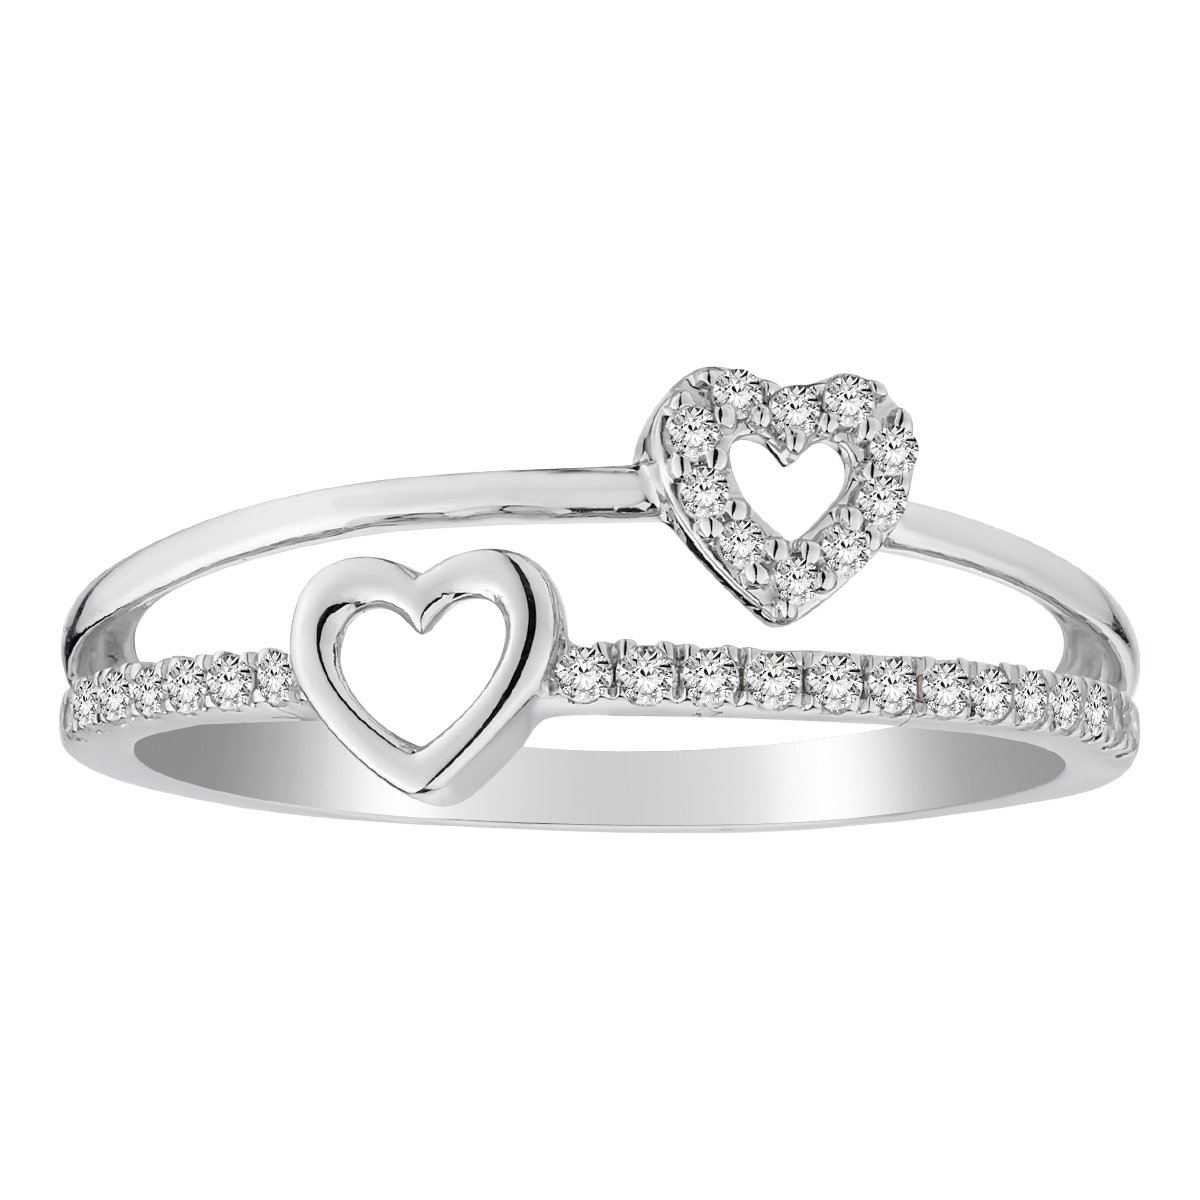 .15 Carat of Diamonds Hearts Ring, 10kt White Gold......................NOW